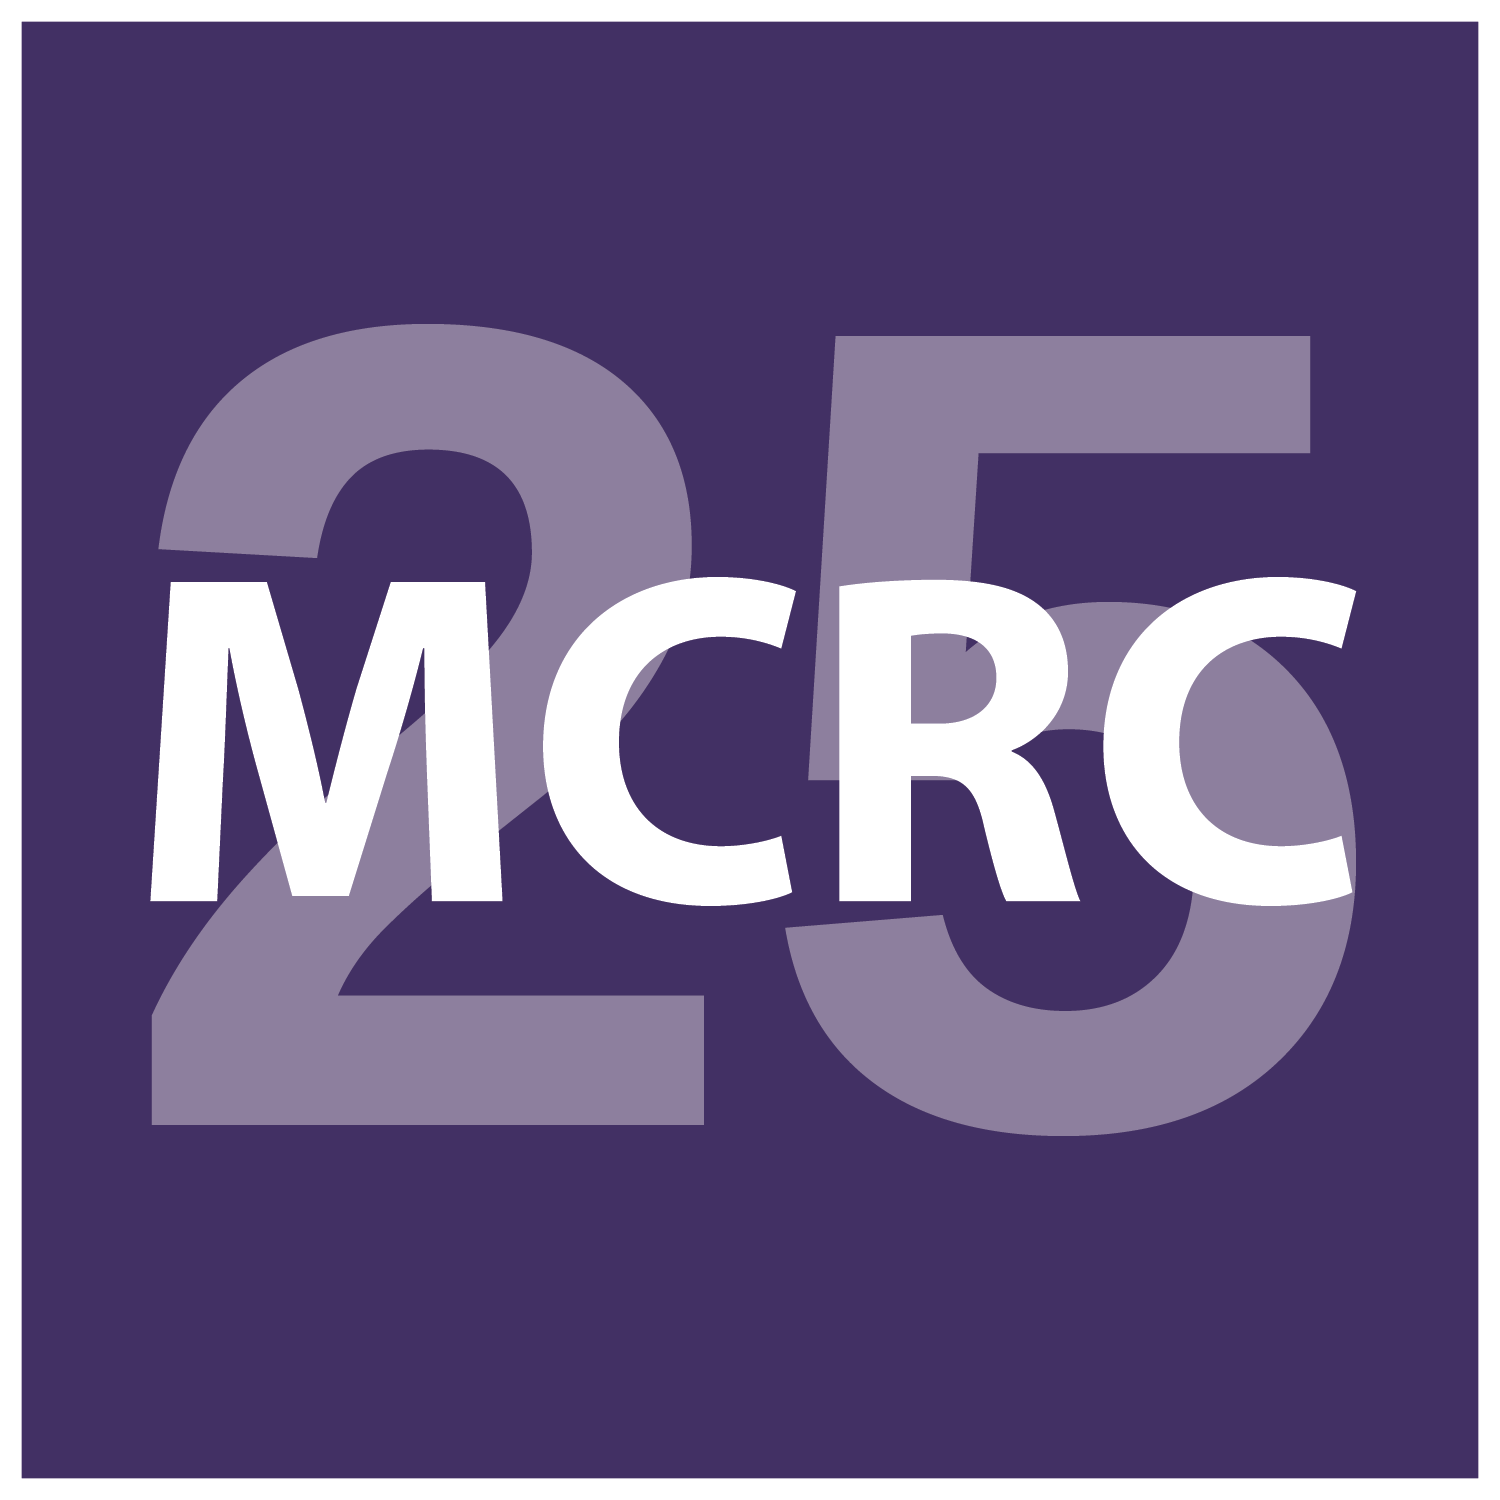 MCRC's 25th Anniversary Logo. A purple background with the number 25 and a white text overlay that reads MCRC